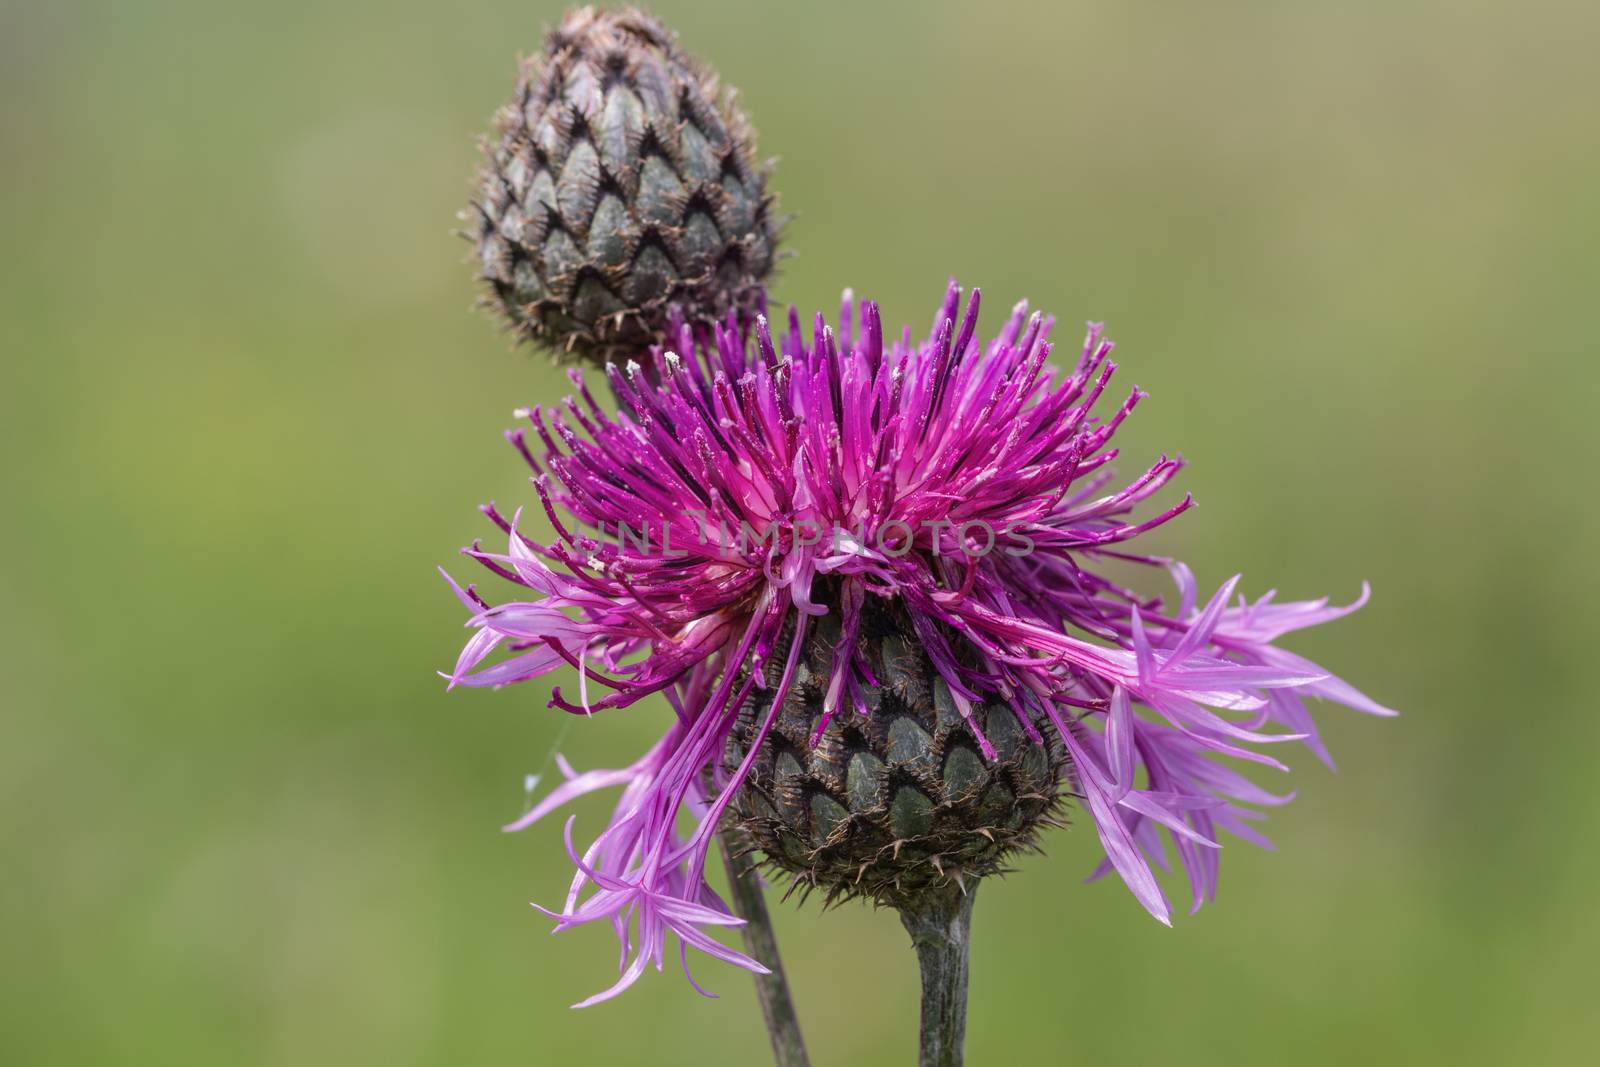 Thistle by Ohotnik